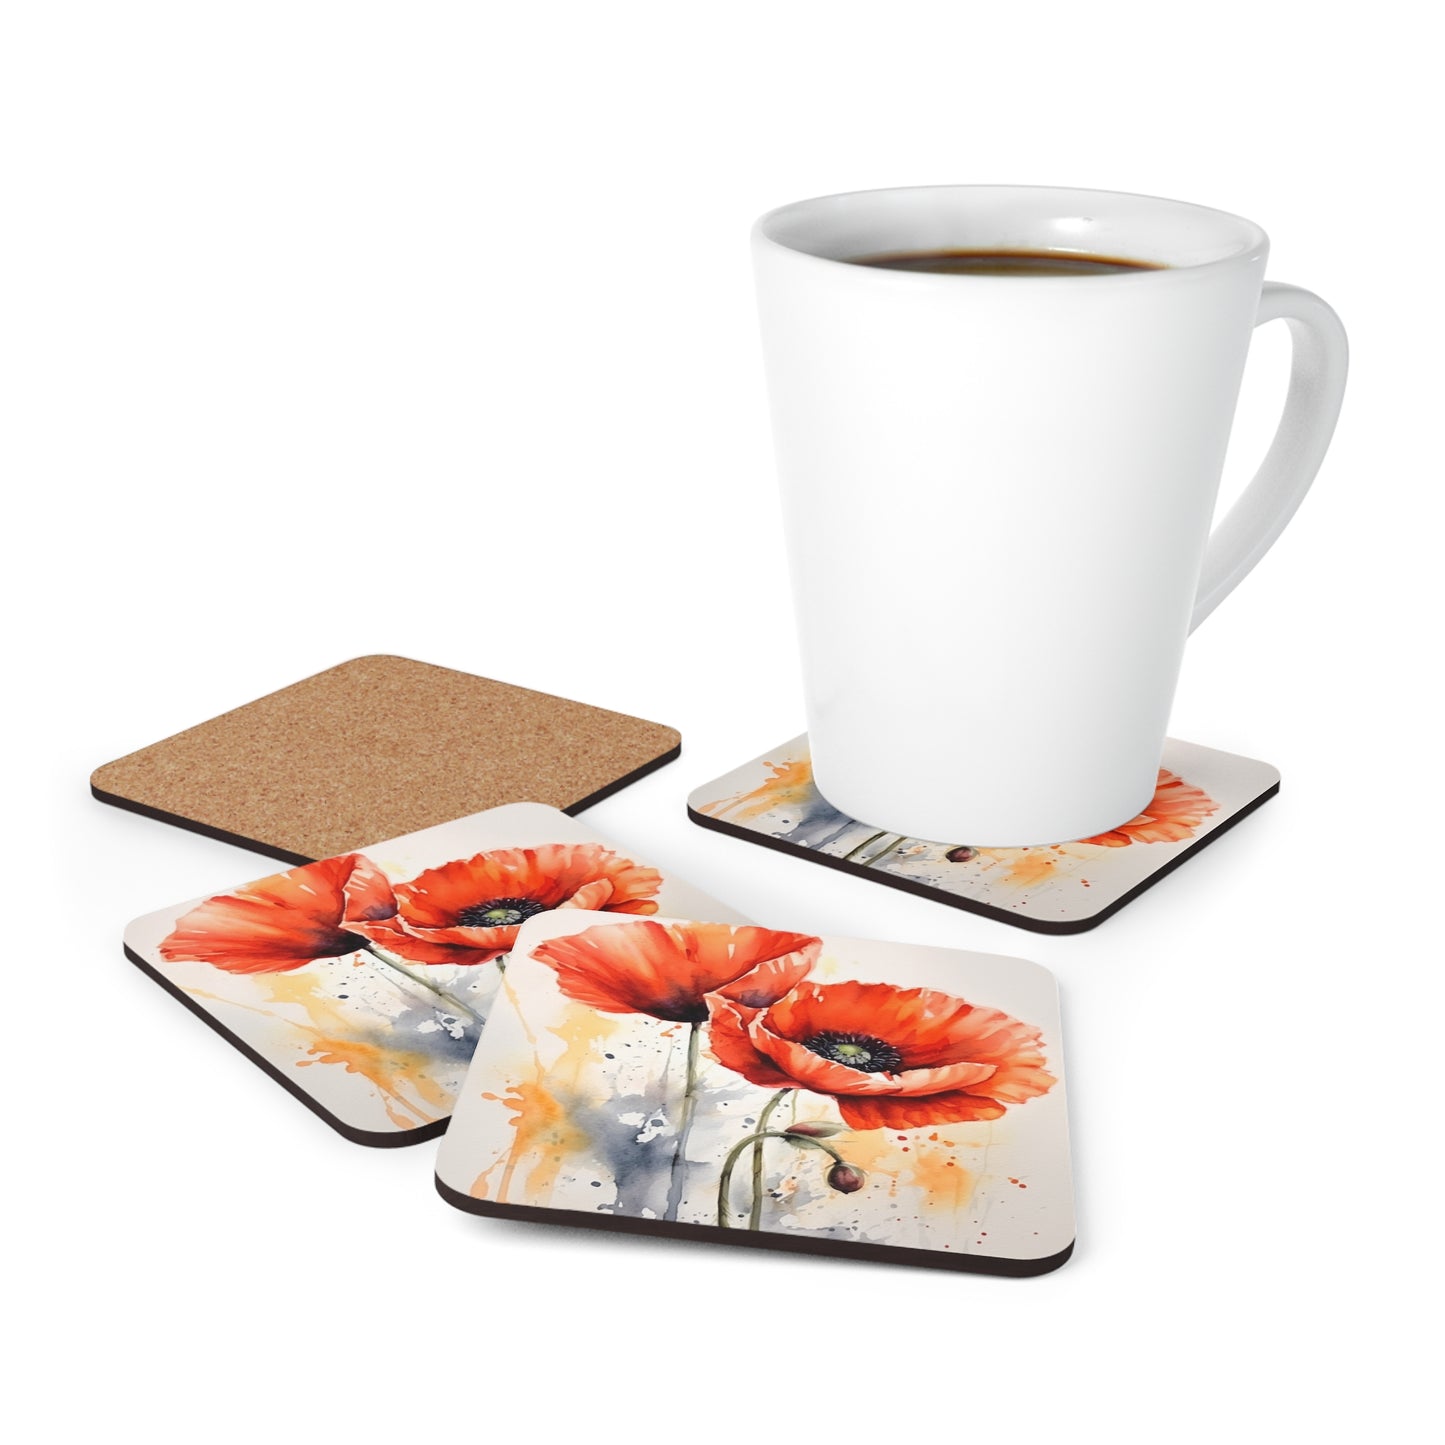 Whimsical Poppy Flower Watercolor Corkwood Coaster Set: An Artistic Delight